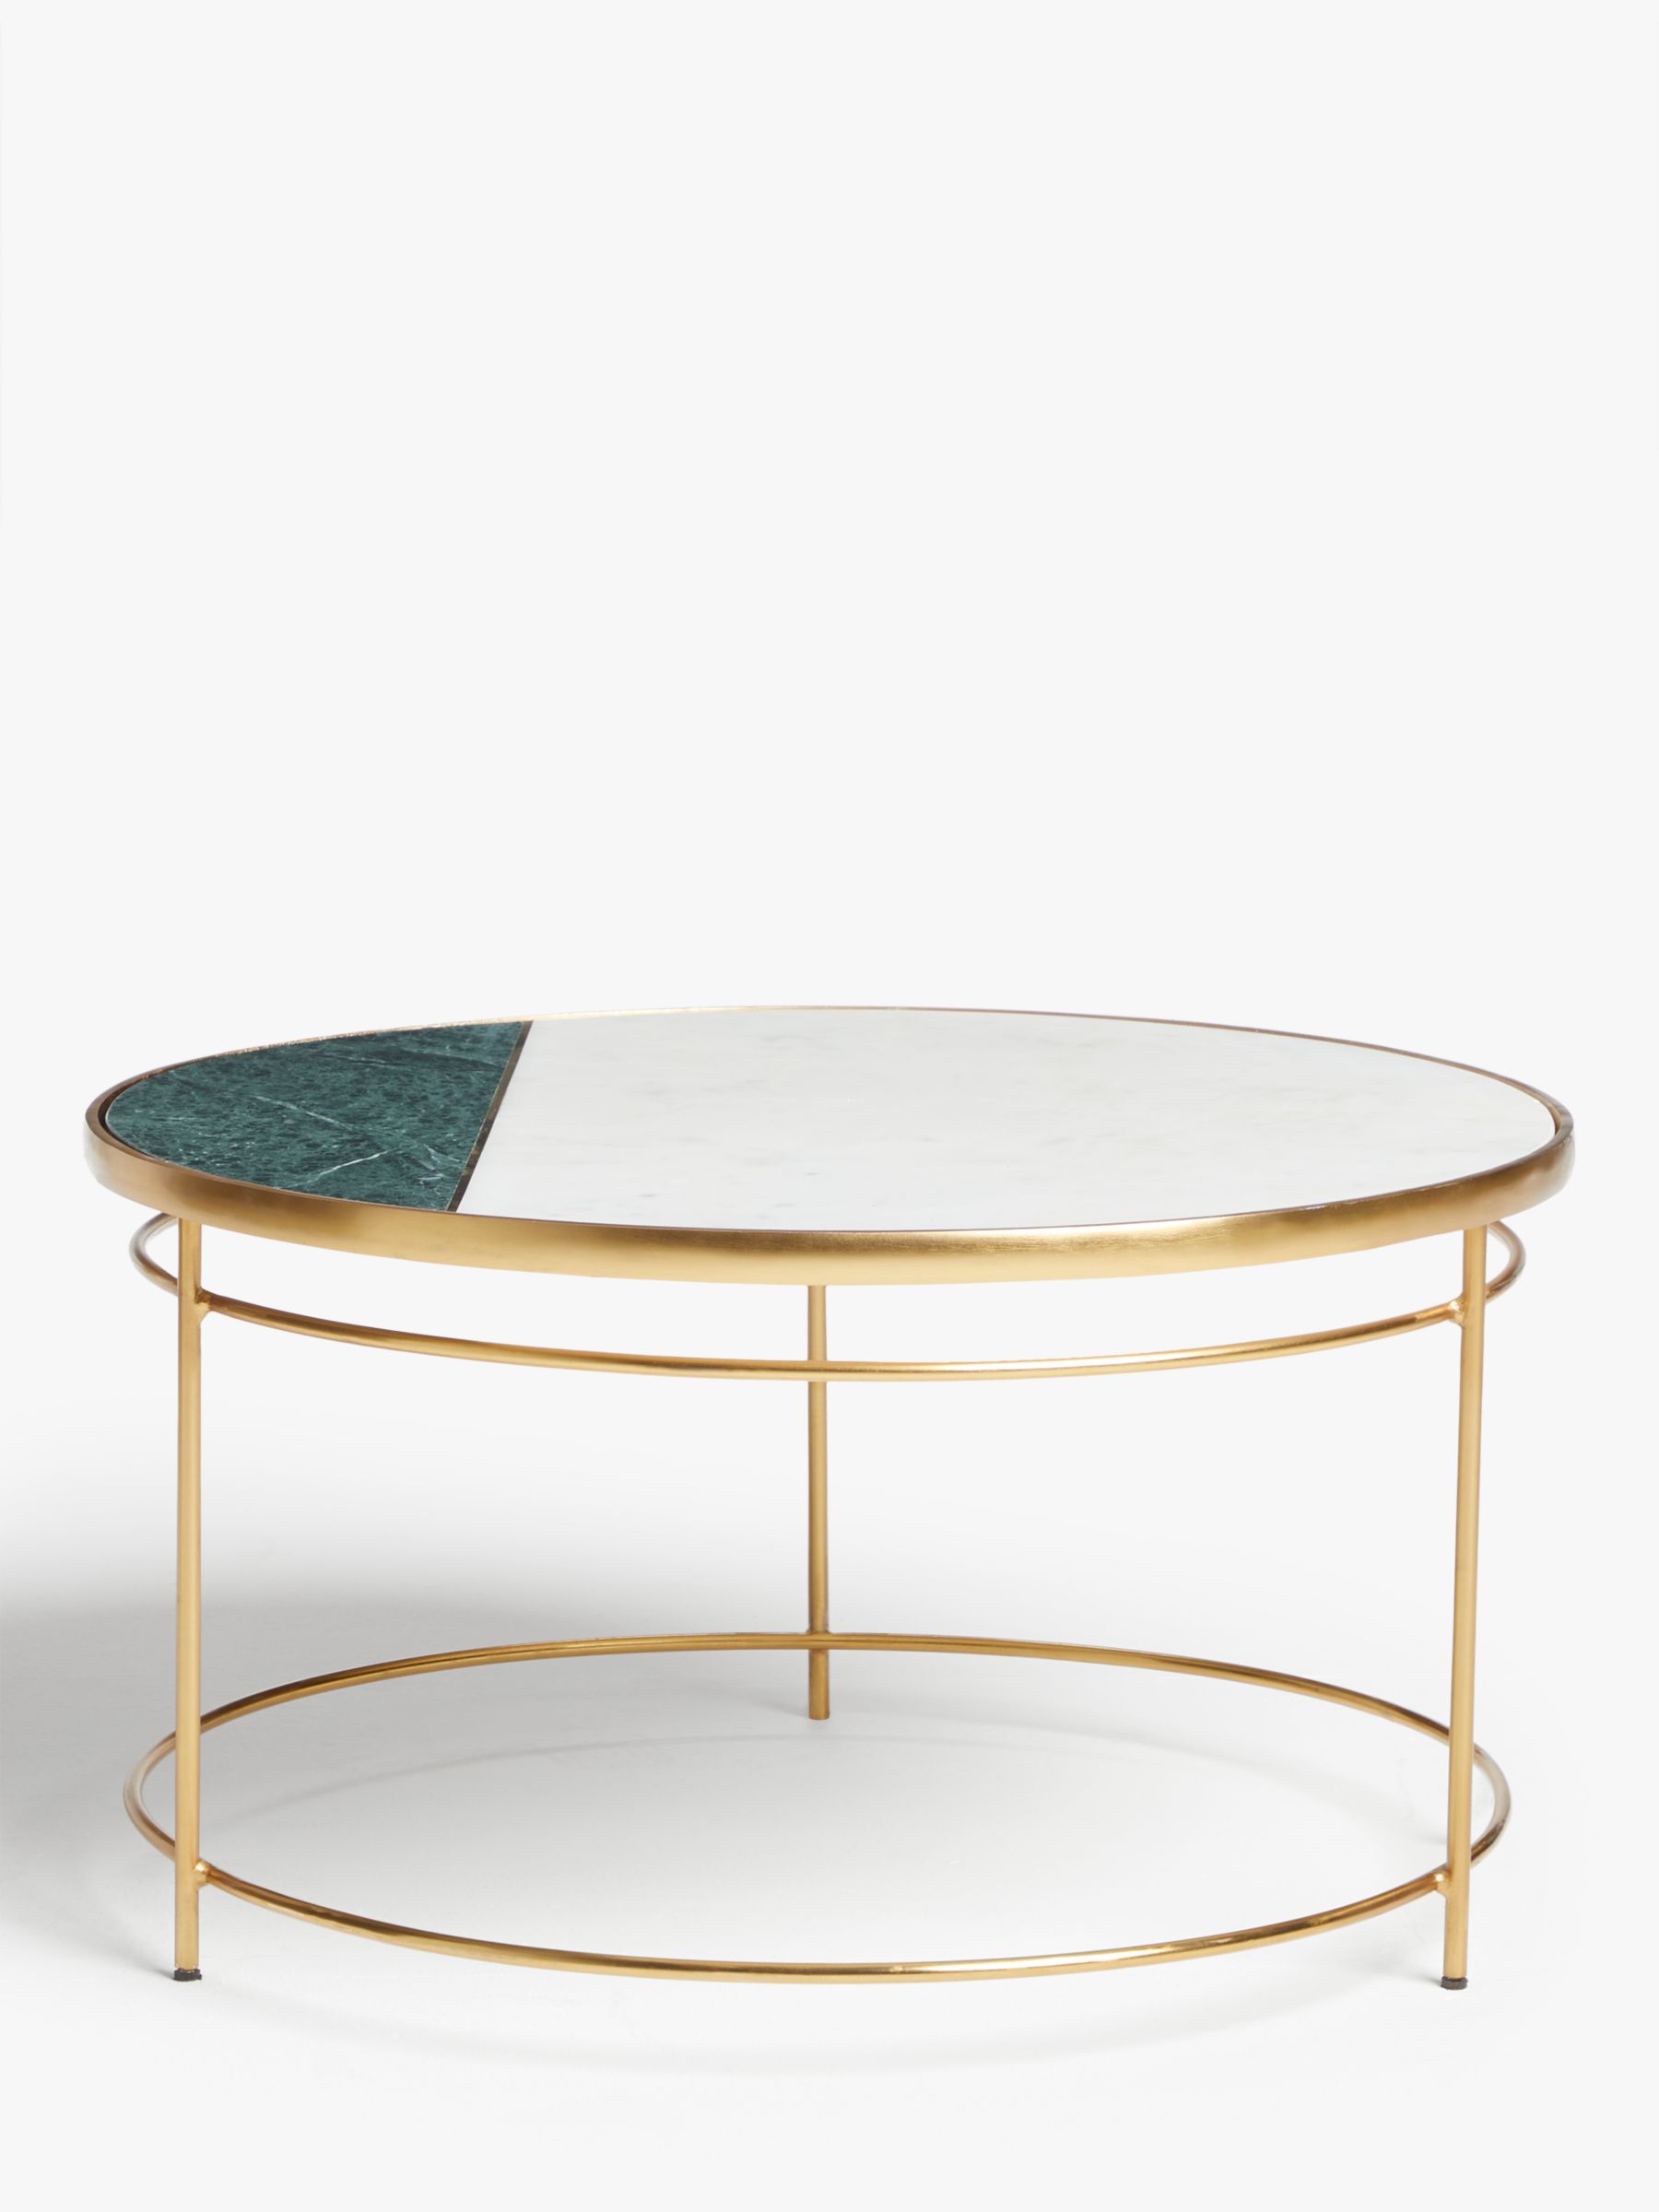 John Lewis & Partners + Swoon Sartre Marble Coffee Table at John Lewis & Partners